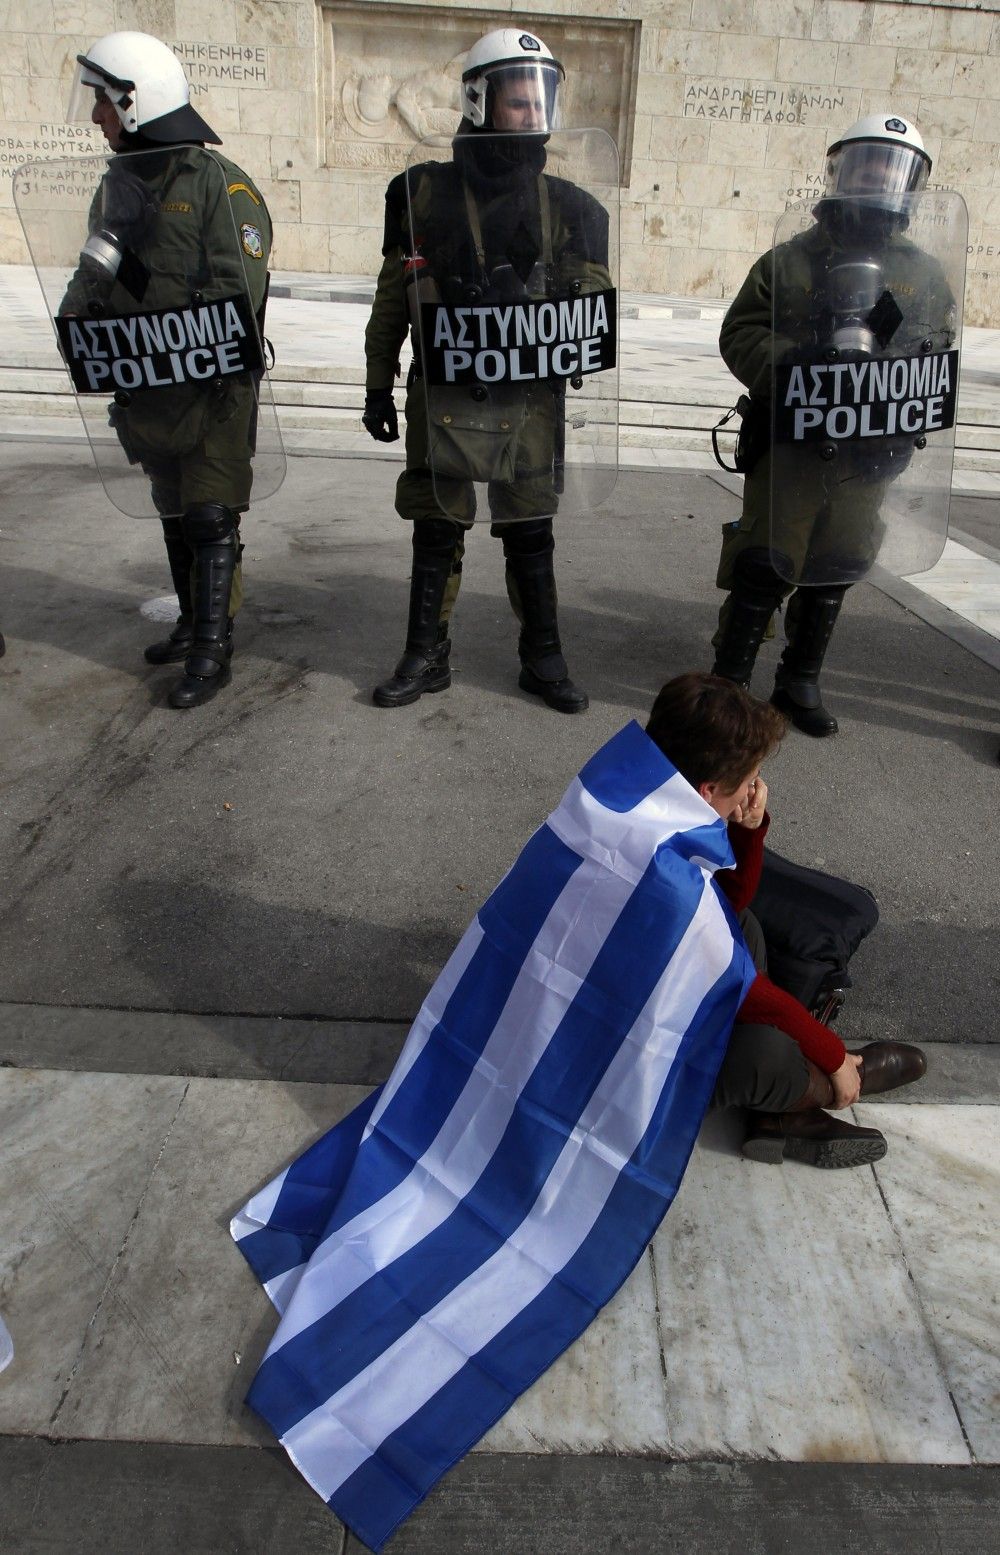 Greece A demonstrator sits in front of officers guarding the countrys parliament in Athens Saturday.